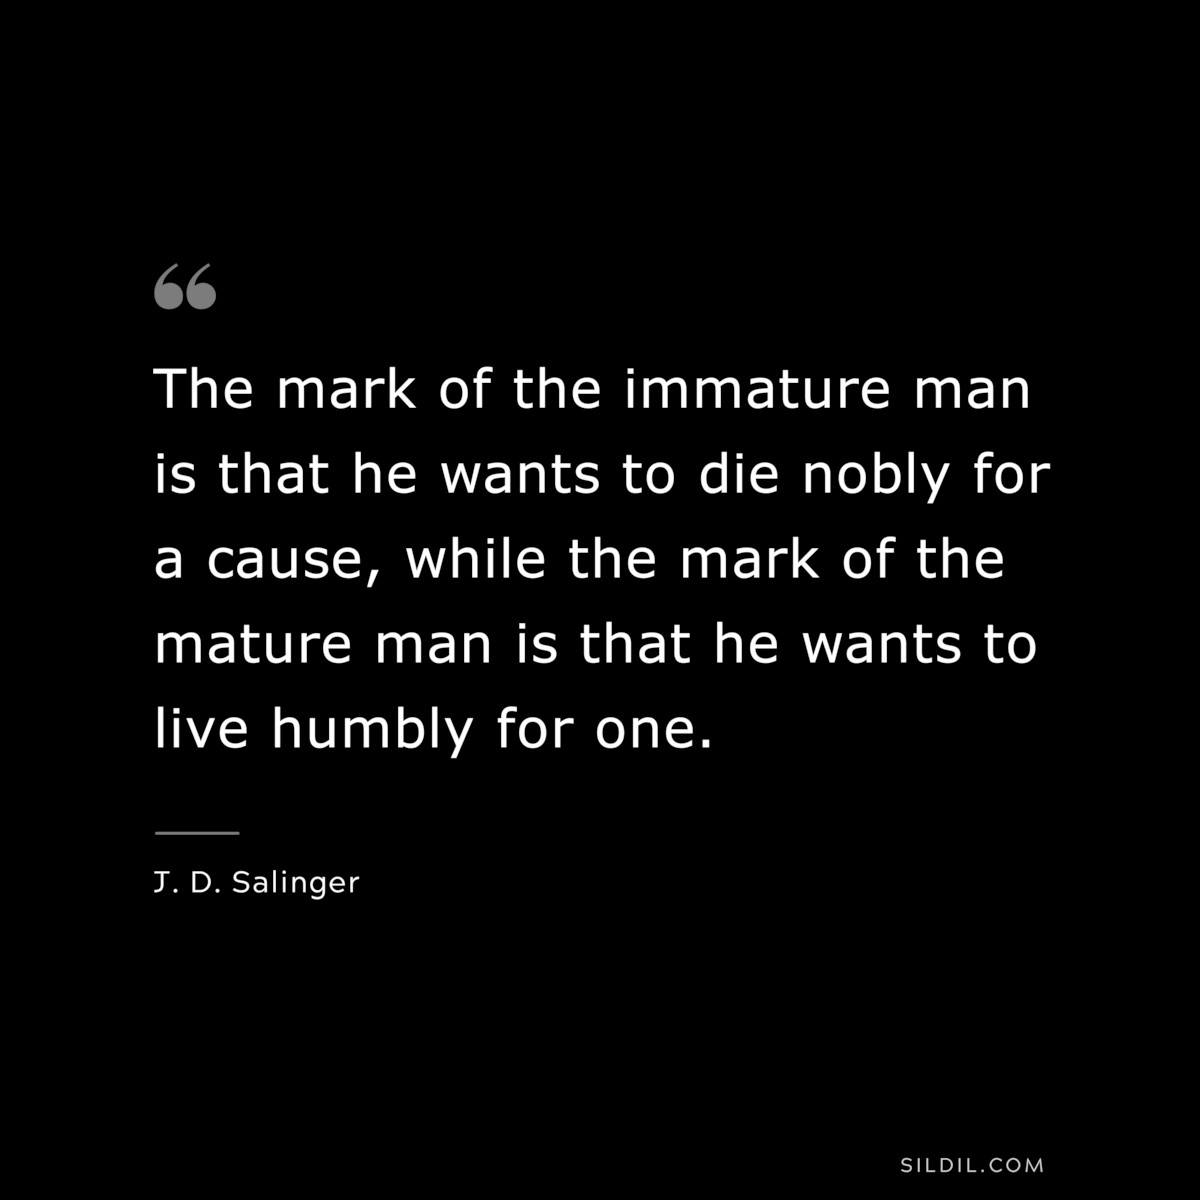 The mark of the immature man is that he wants to die nobly for a cause, while the mark of the mature man is that he wants to live humbly for one. — J. D. Salinger